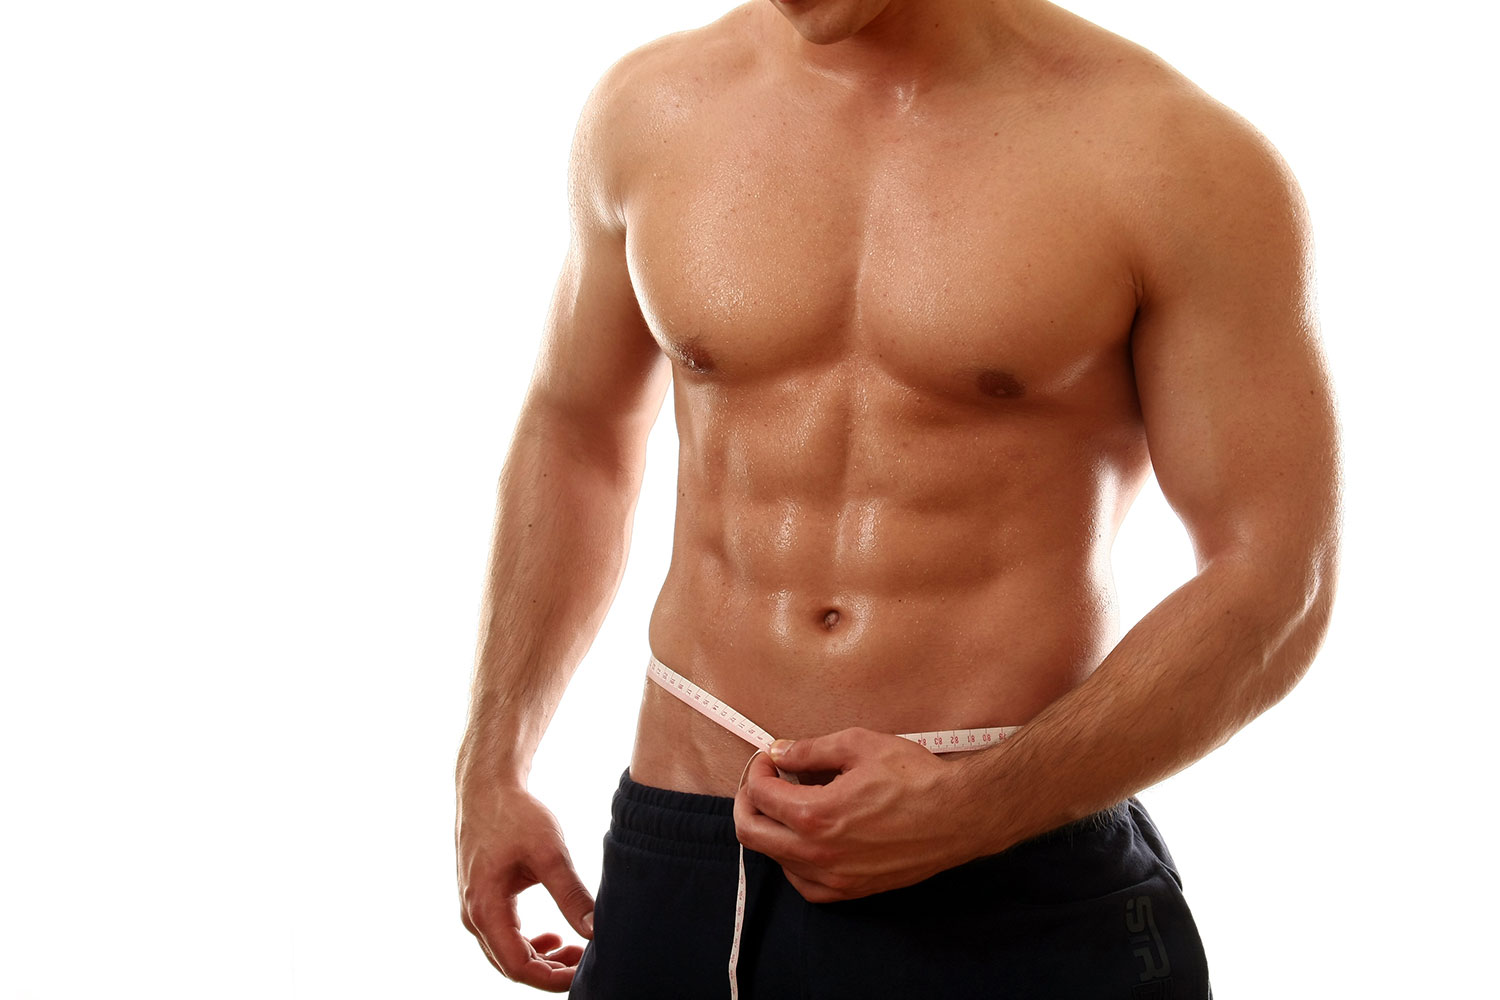 Steps To Get Rid Of Male Body Fat Part 2